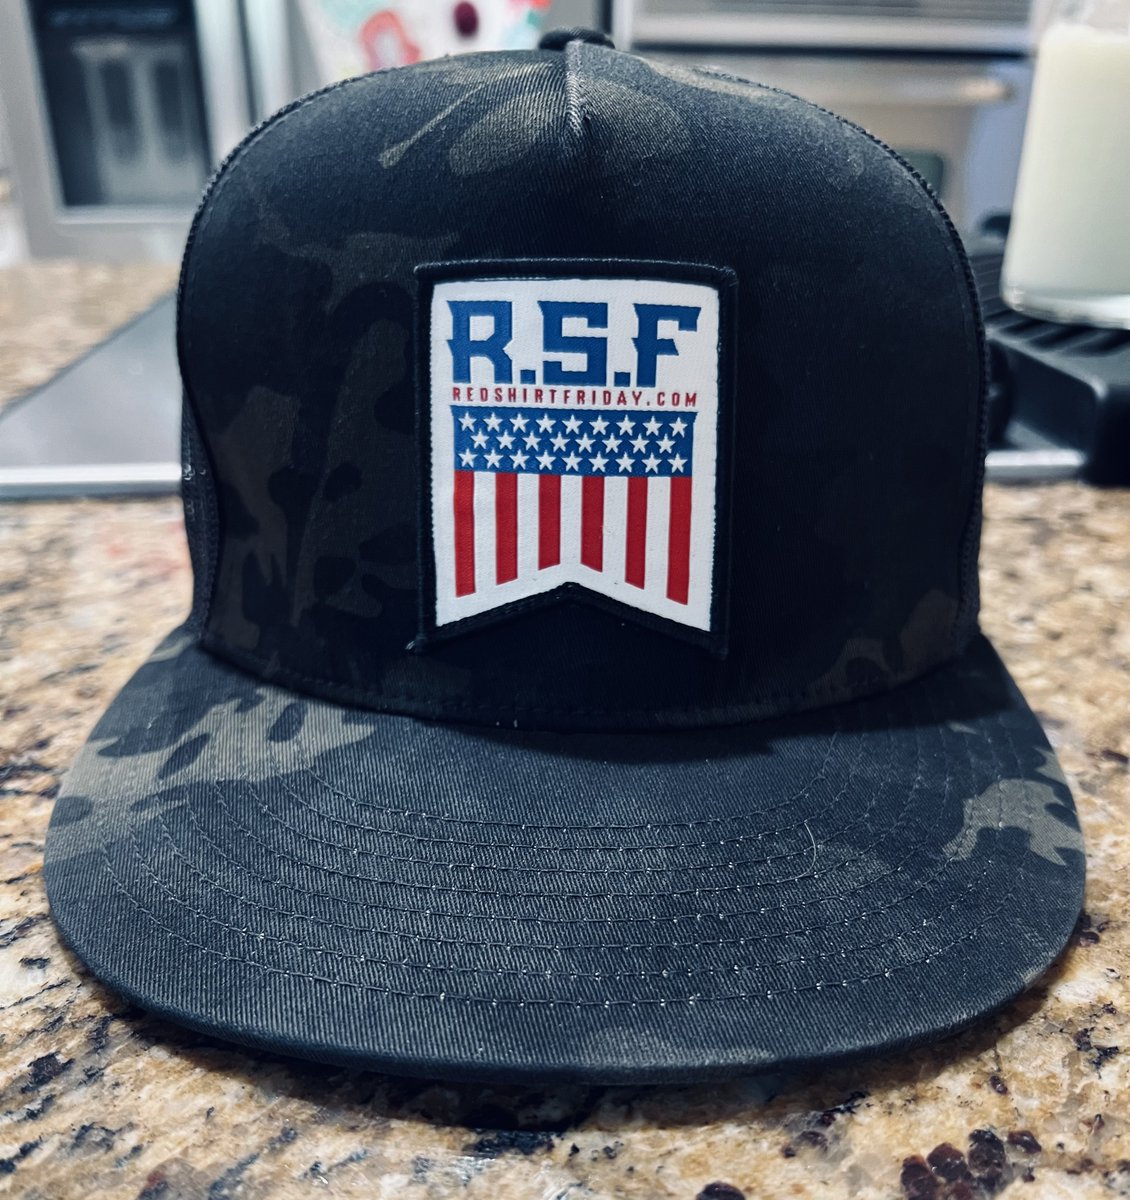 Check out our RSF Camo Trucker Cap!

We appreciate our Red Shirt Friday supporters. 

#RedShirtFriday #RSF #nonprofit #supportourtroops #supportourveterans #proudamerican #usarmy #usmc #usnavy #usairforce #spaceforcedod #uscg #usnationalguard #usmilitary #respecteveryonedeployed